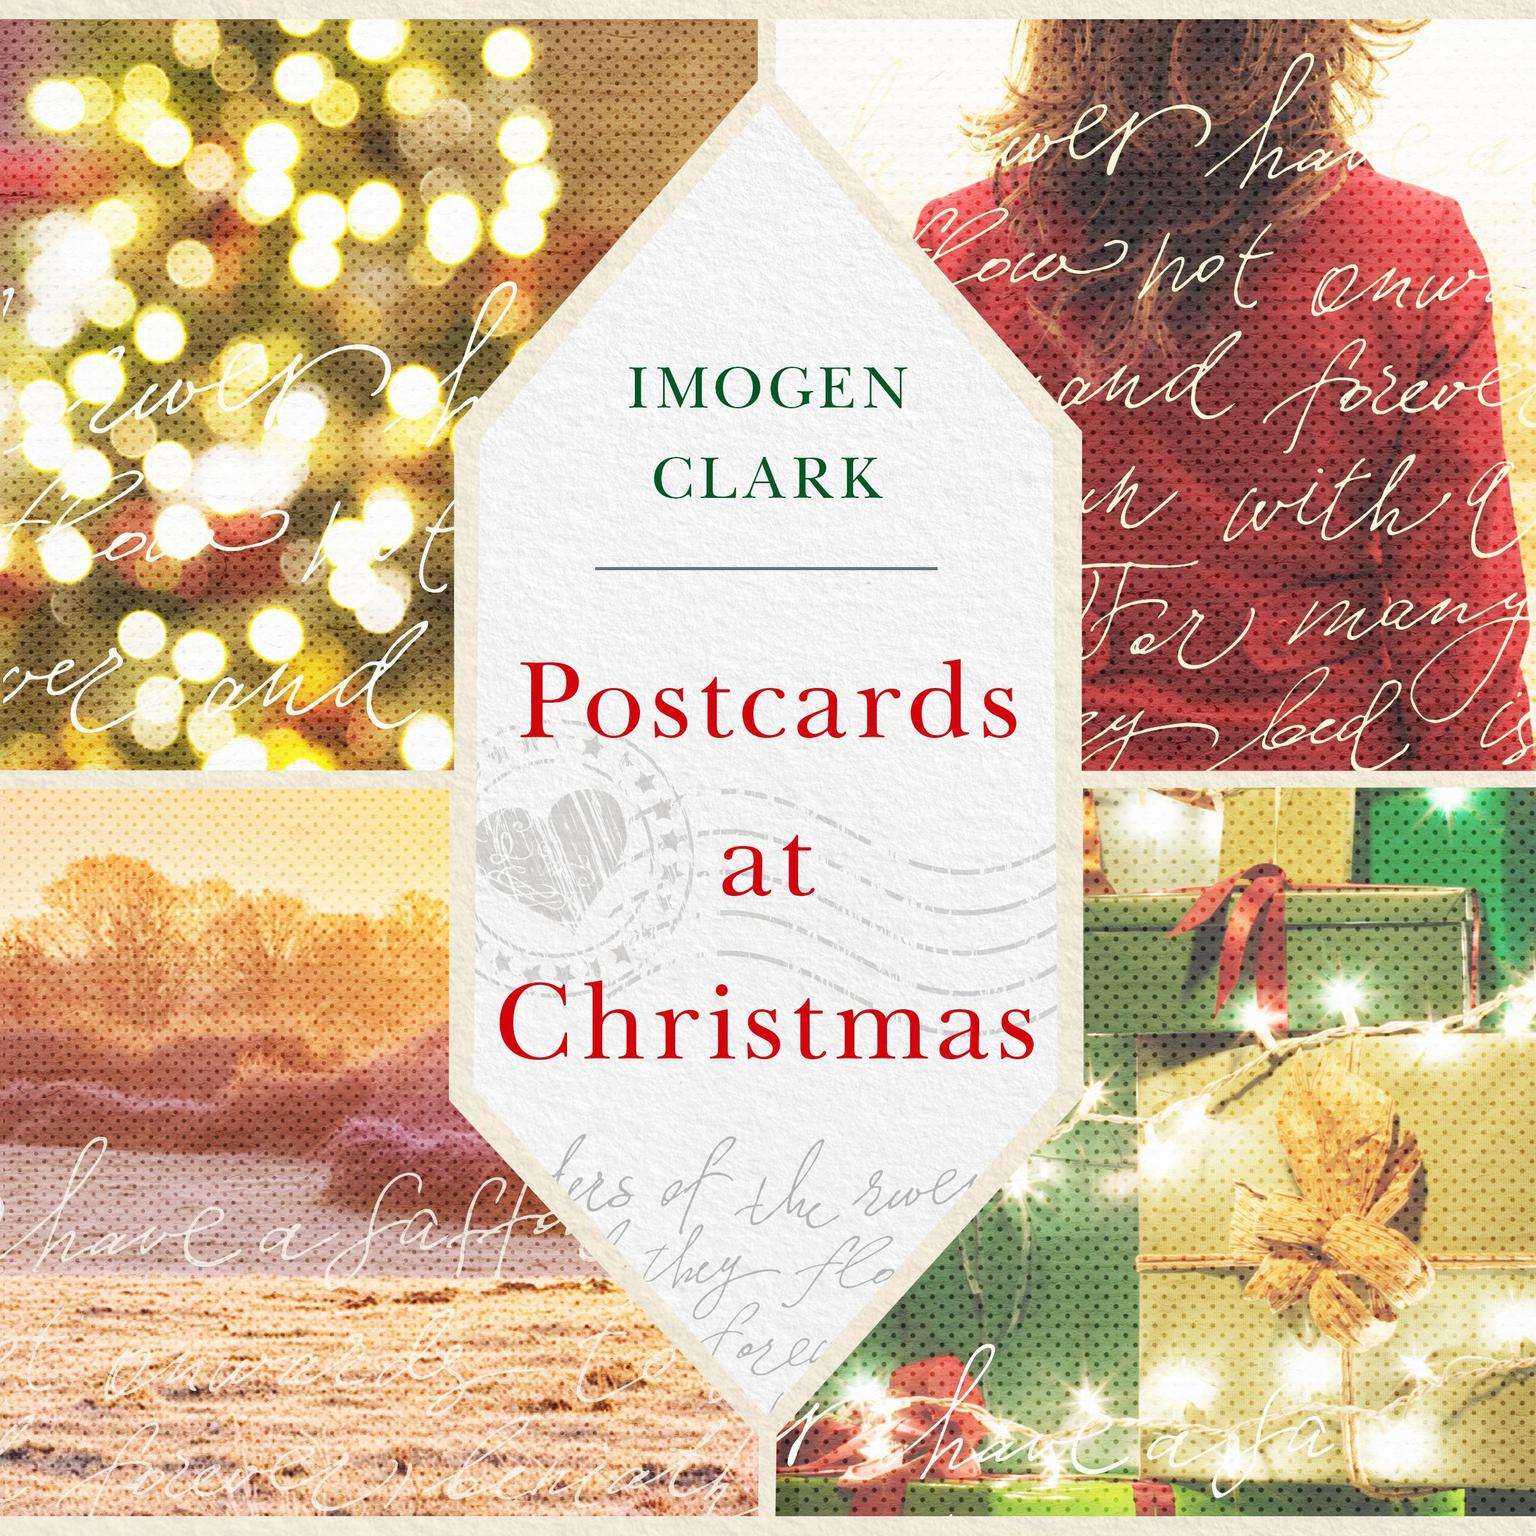 Postcards at Christmas Audiobook, by Imogen Clark